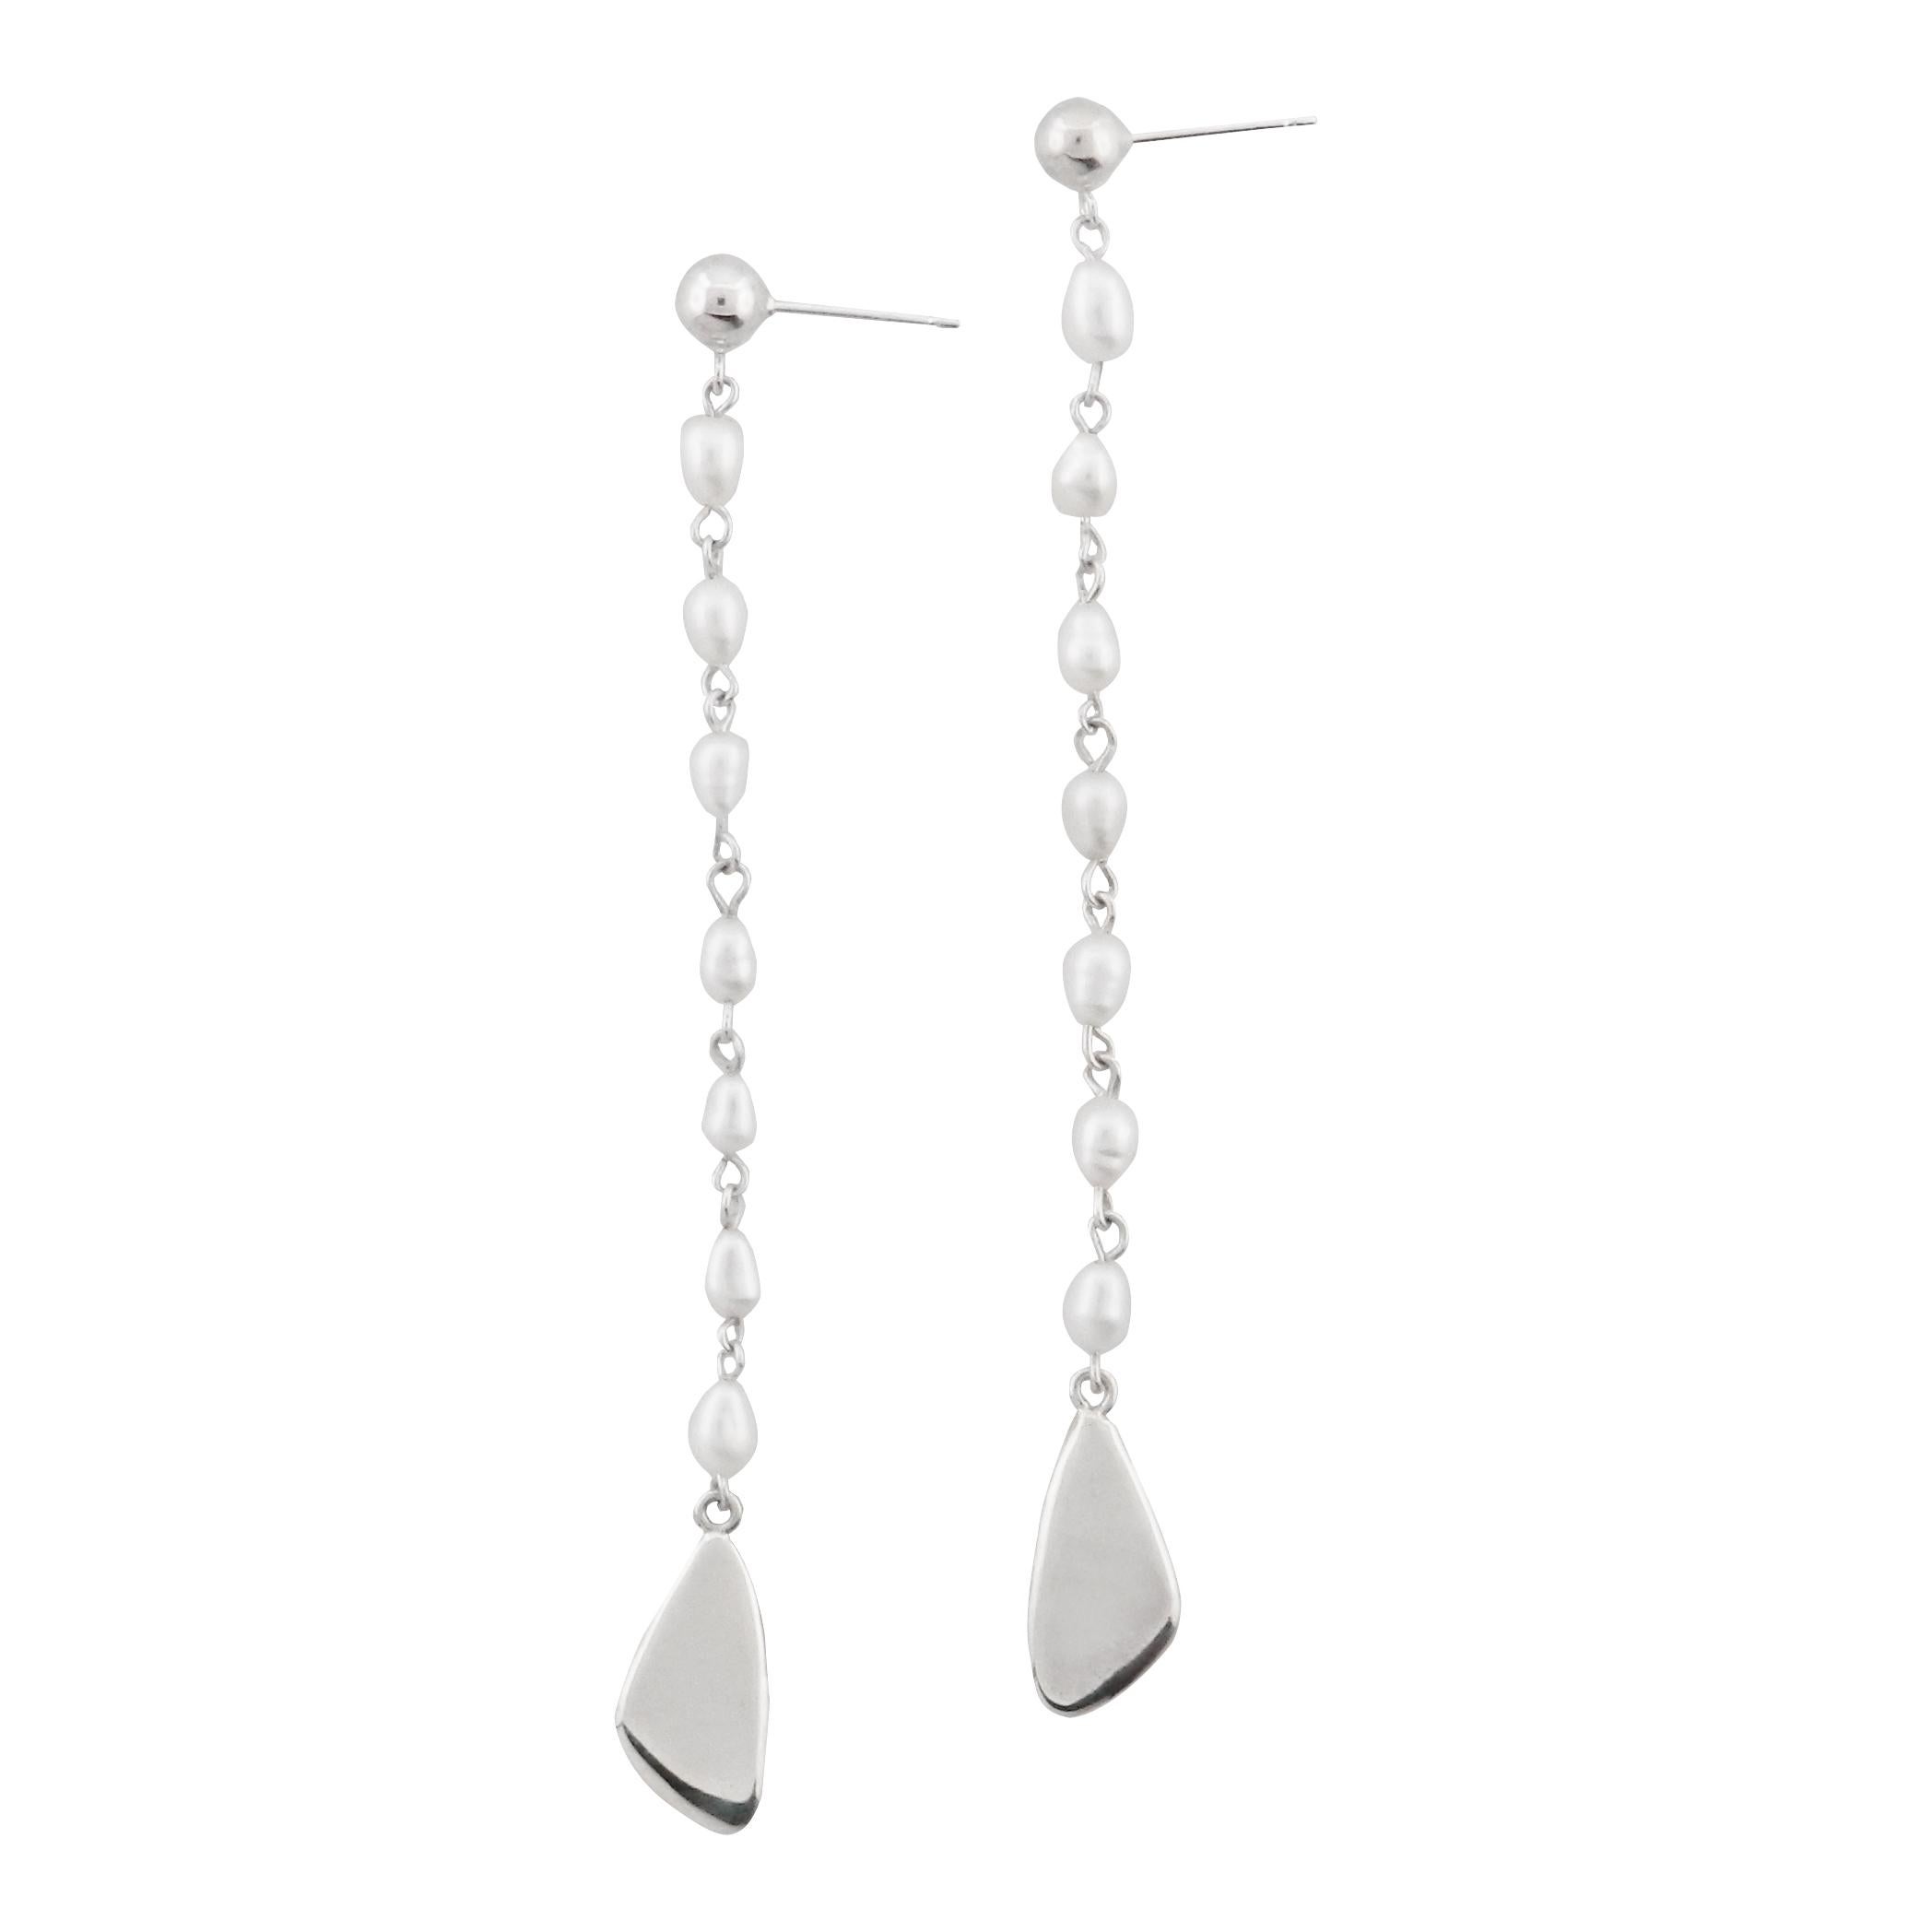 The Sway earrings are named for their graceful sway, exuding playful femininity and movement. A delicate chain of freshwater pearls gracefully suspends a petal-shaped charm that dances with every step.

Sterling Silver

Sterling silver posts and